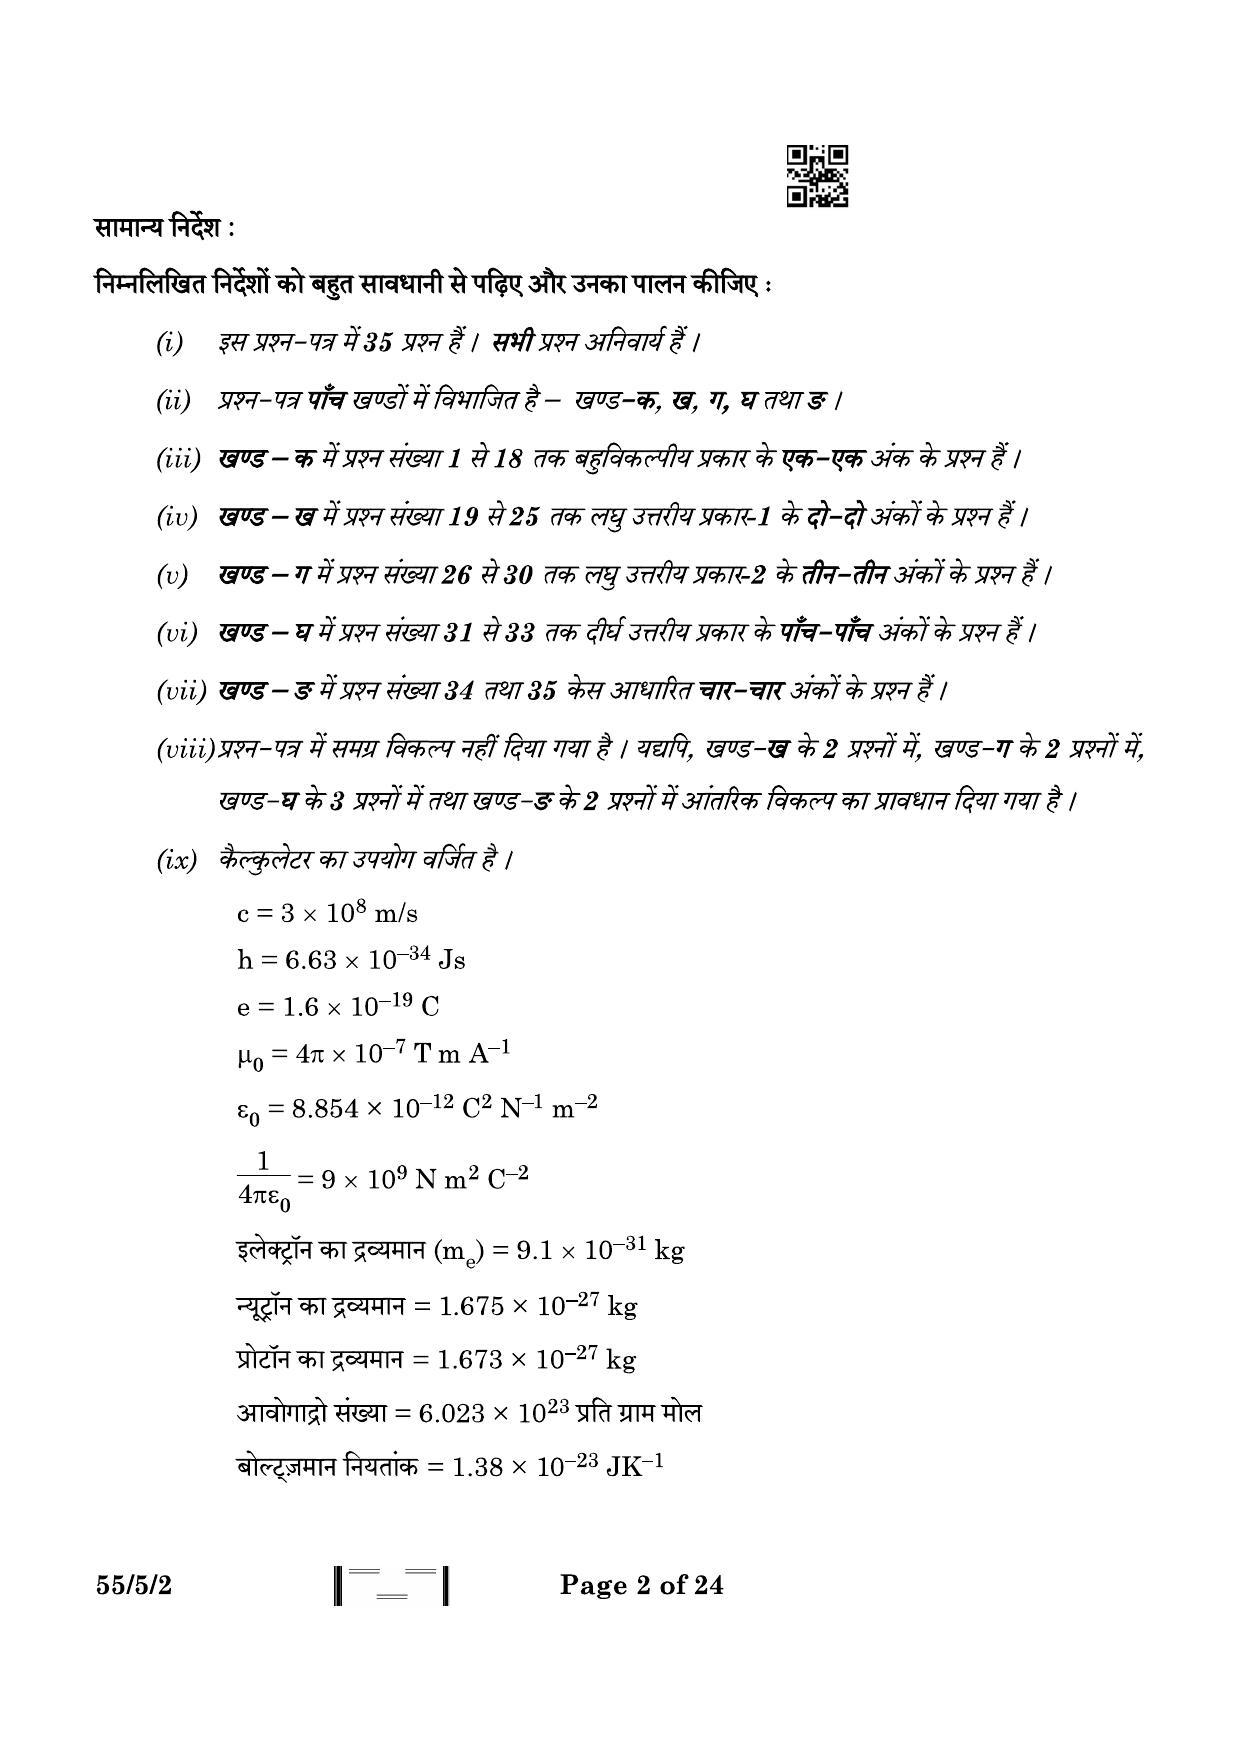 CBSE Class 12 55-5-2 Physics 2023 Question Paper - Page 2